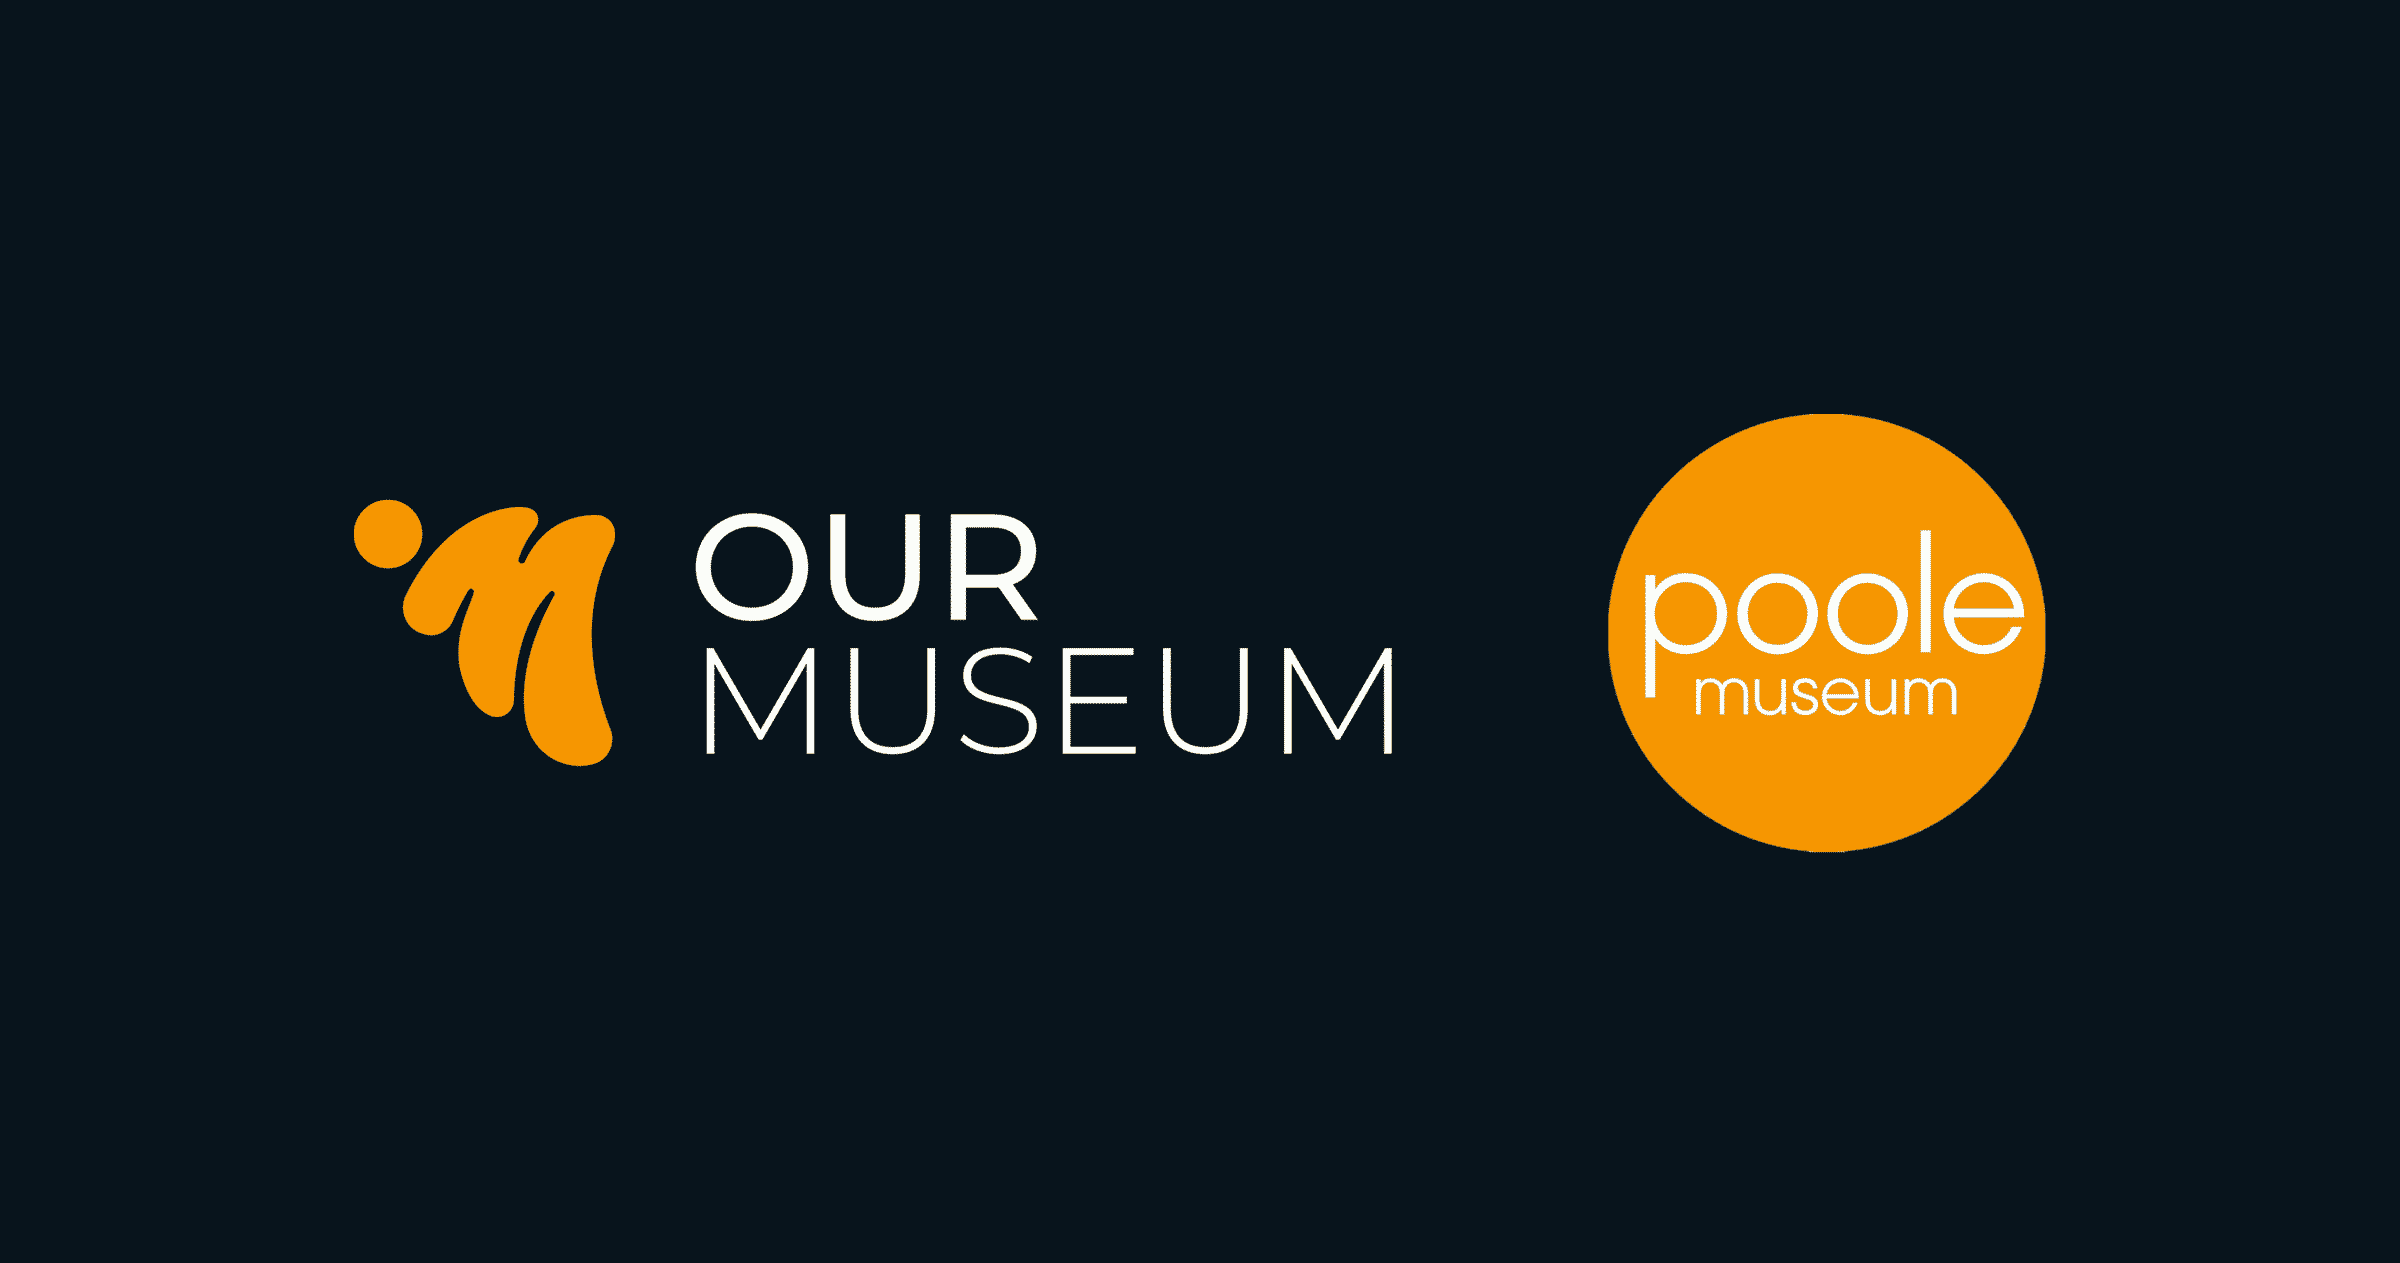 our museum logo next to poole museum logo